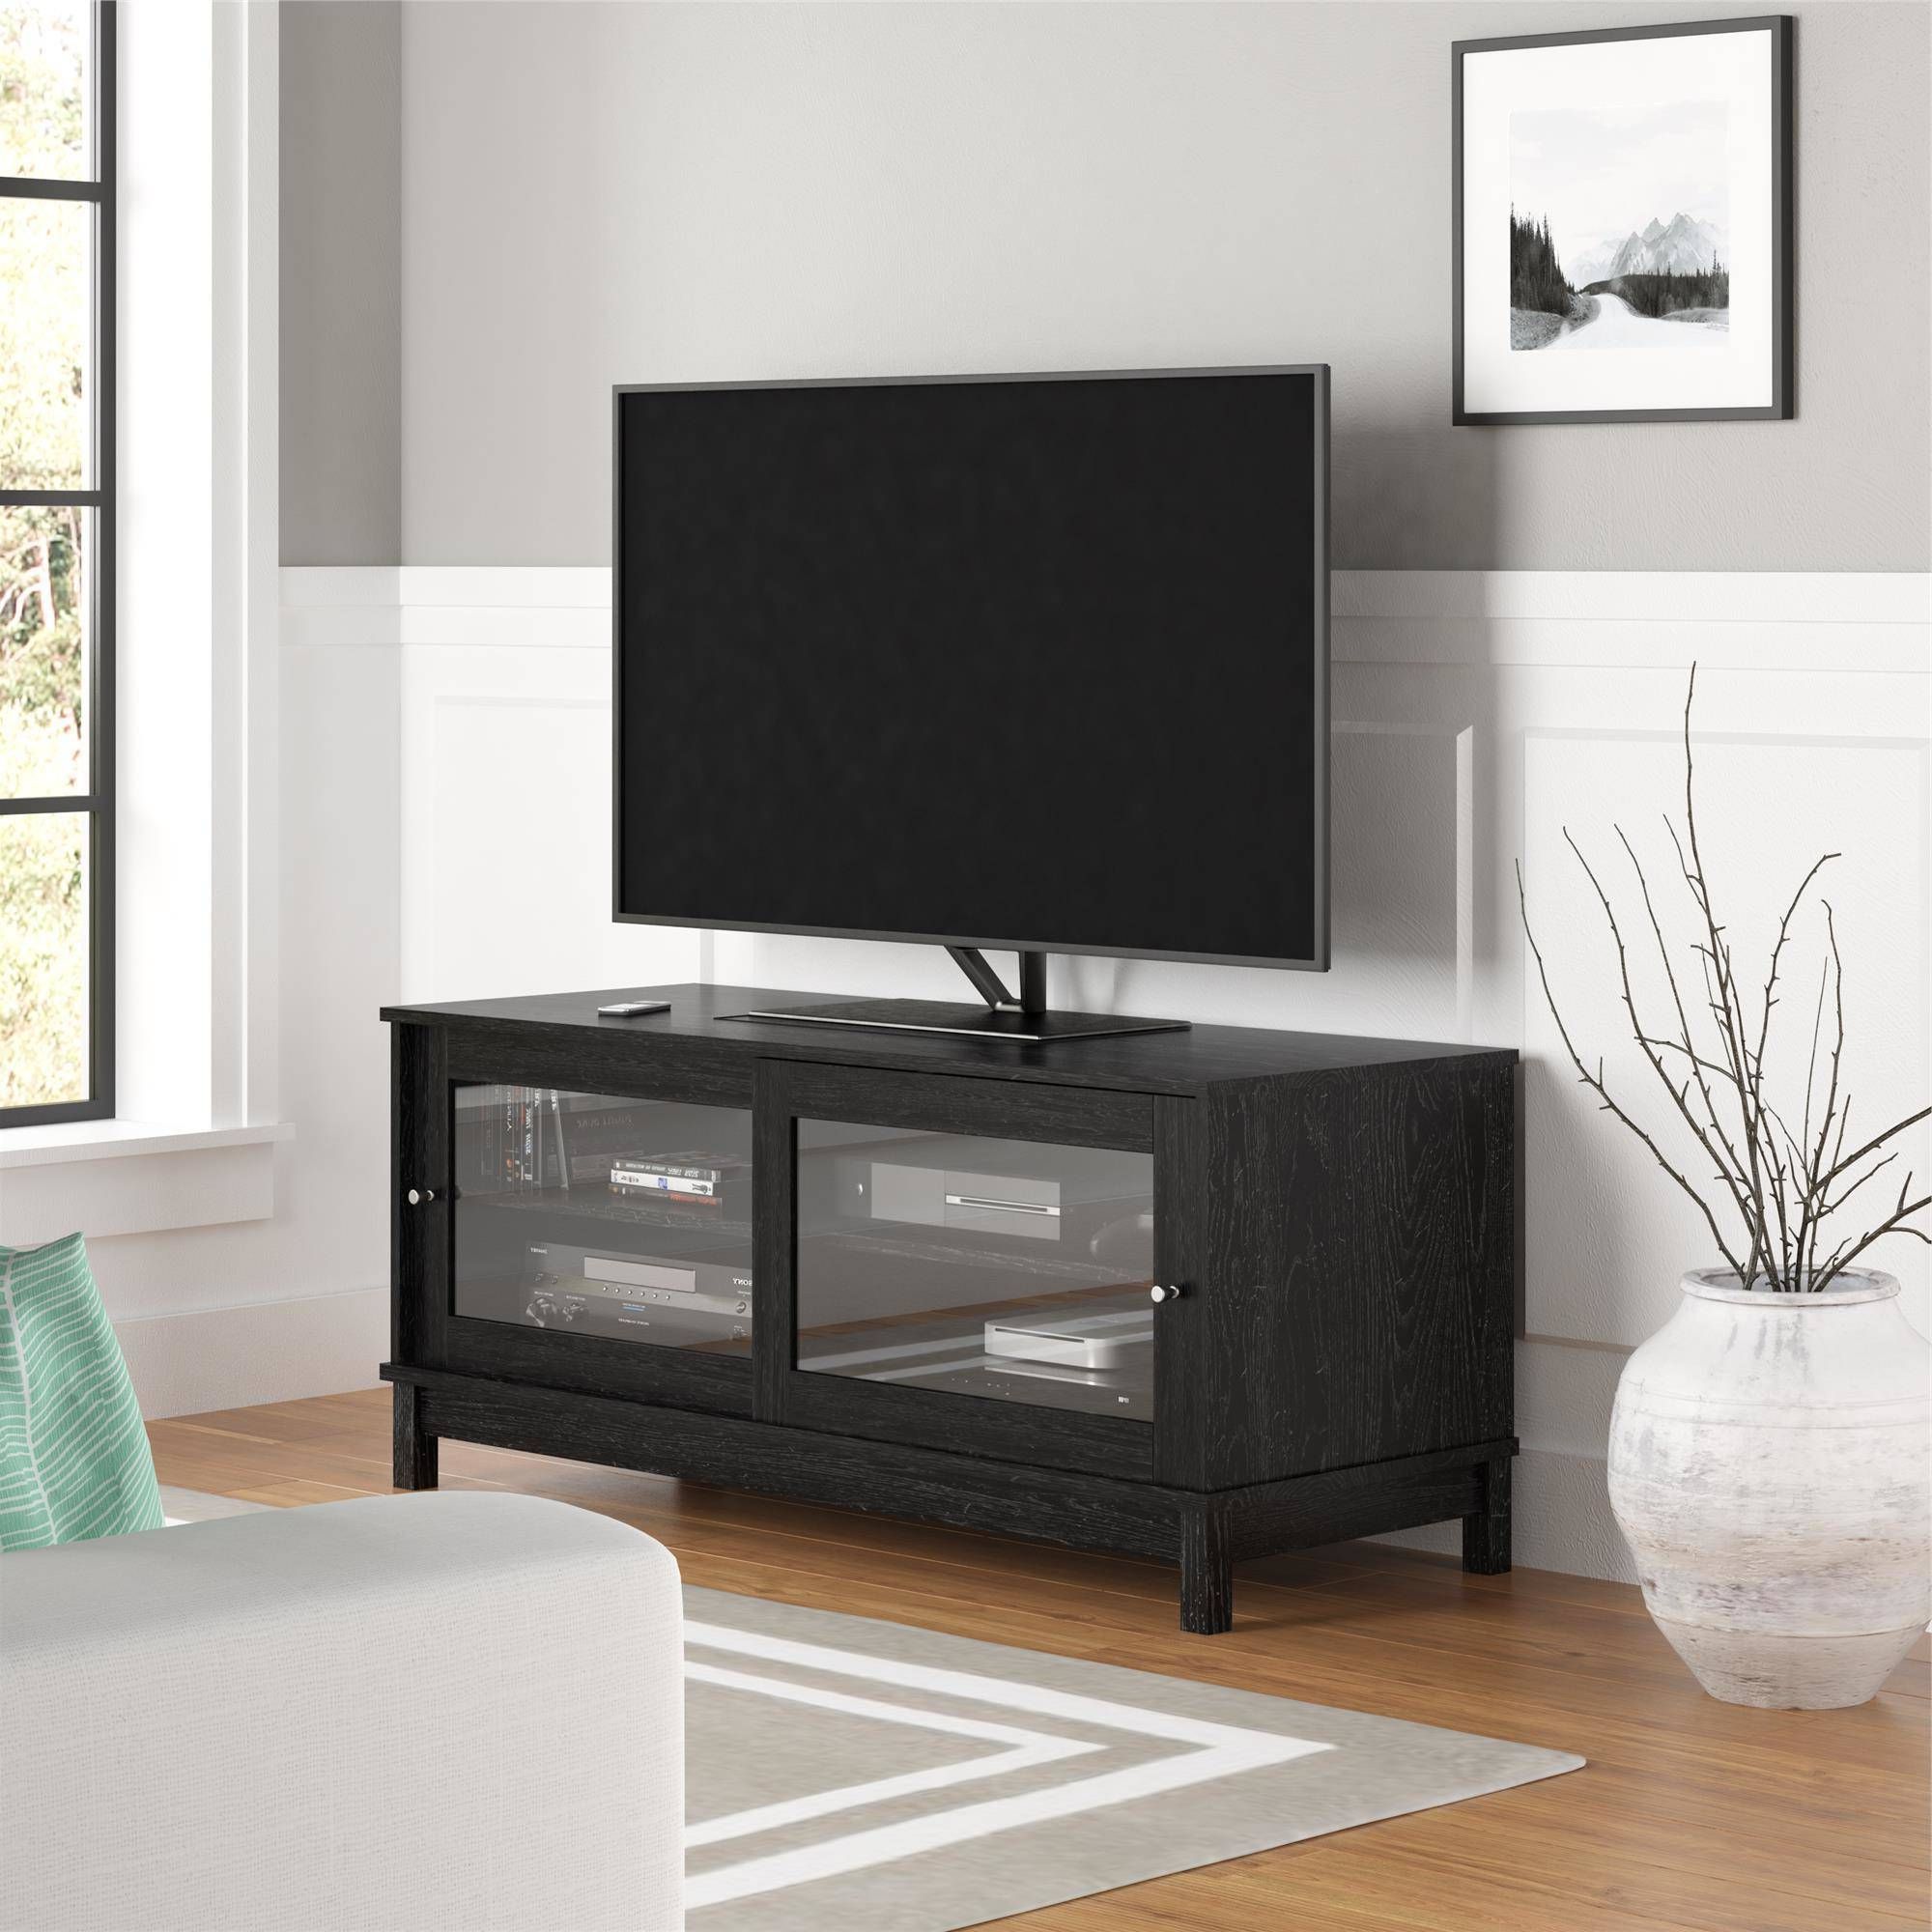 Home Entertainment Center Tv Stand Media Storage With Throughout Petter Tv Media Stands (View 15 of 20)